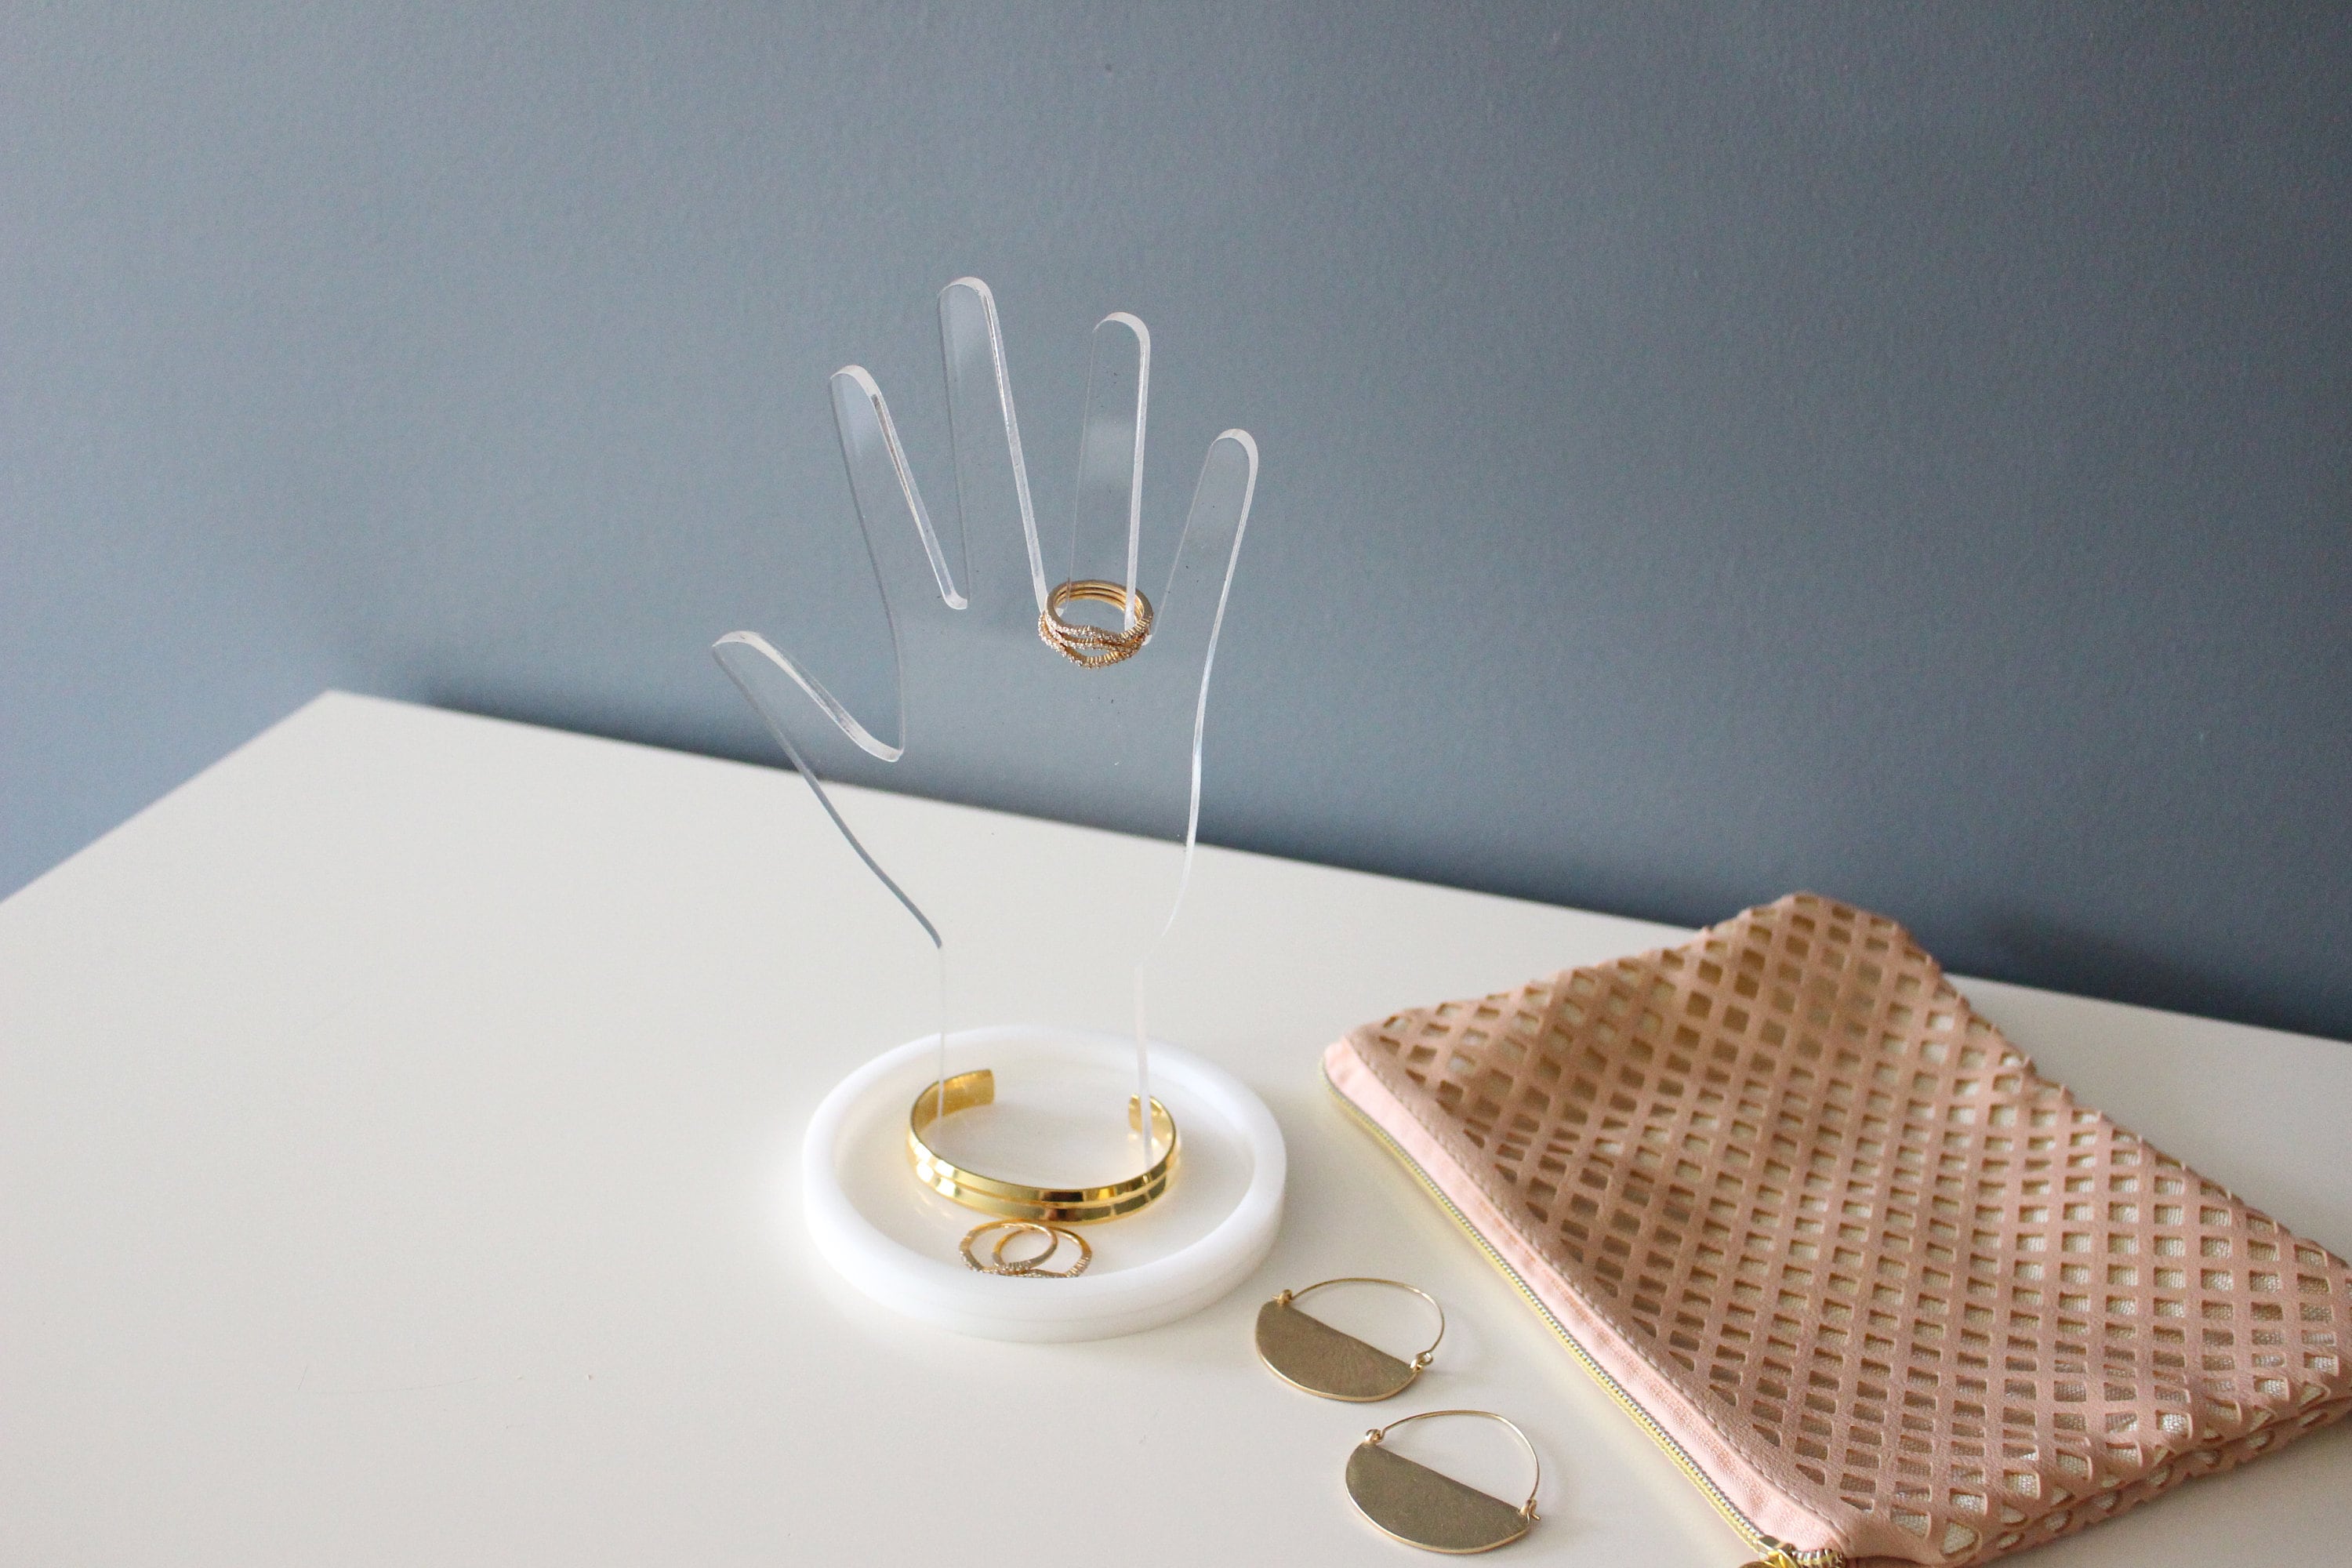 Hand Jewelry display for bracelets, rings and watches - Made on a Glowforge  - Glowforge Owners Forum